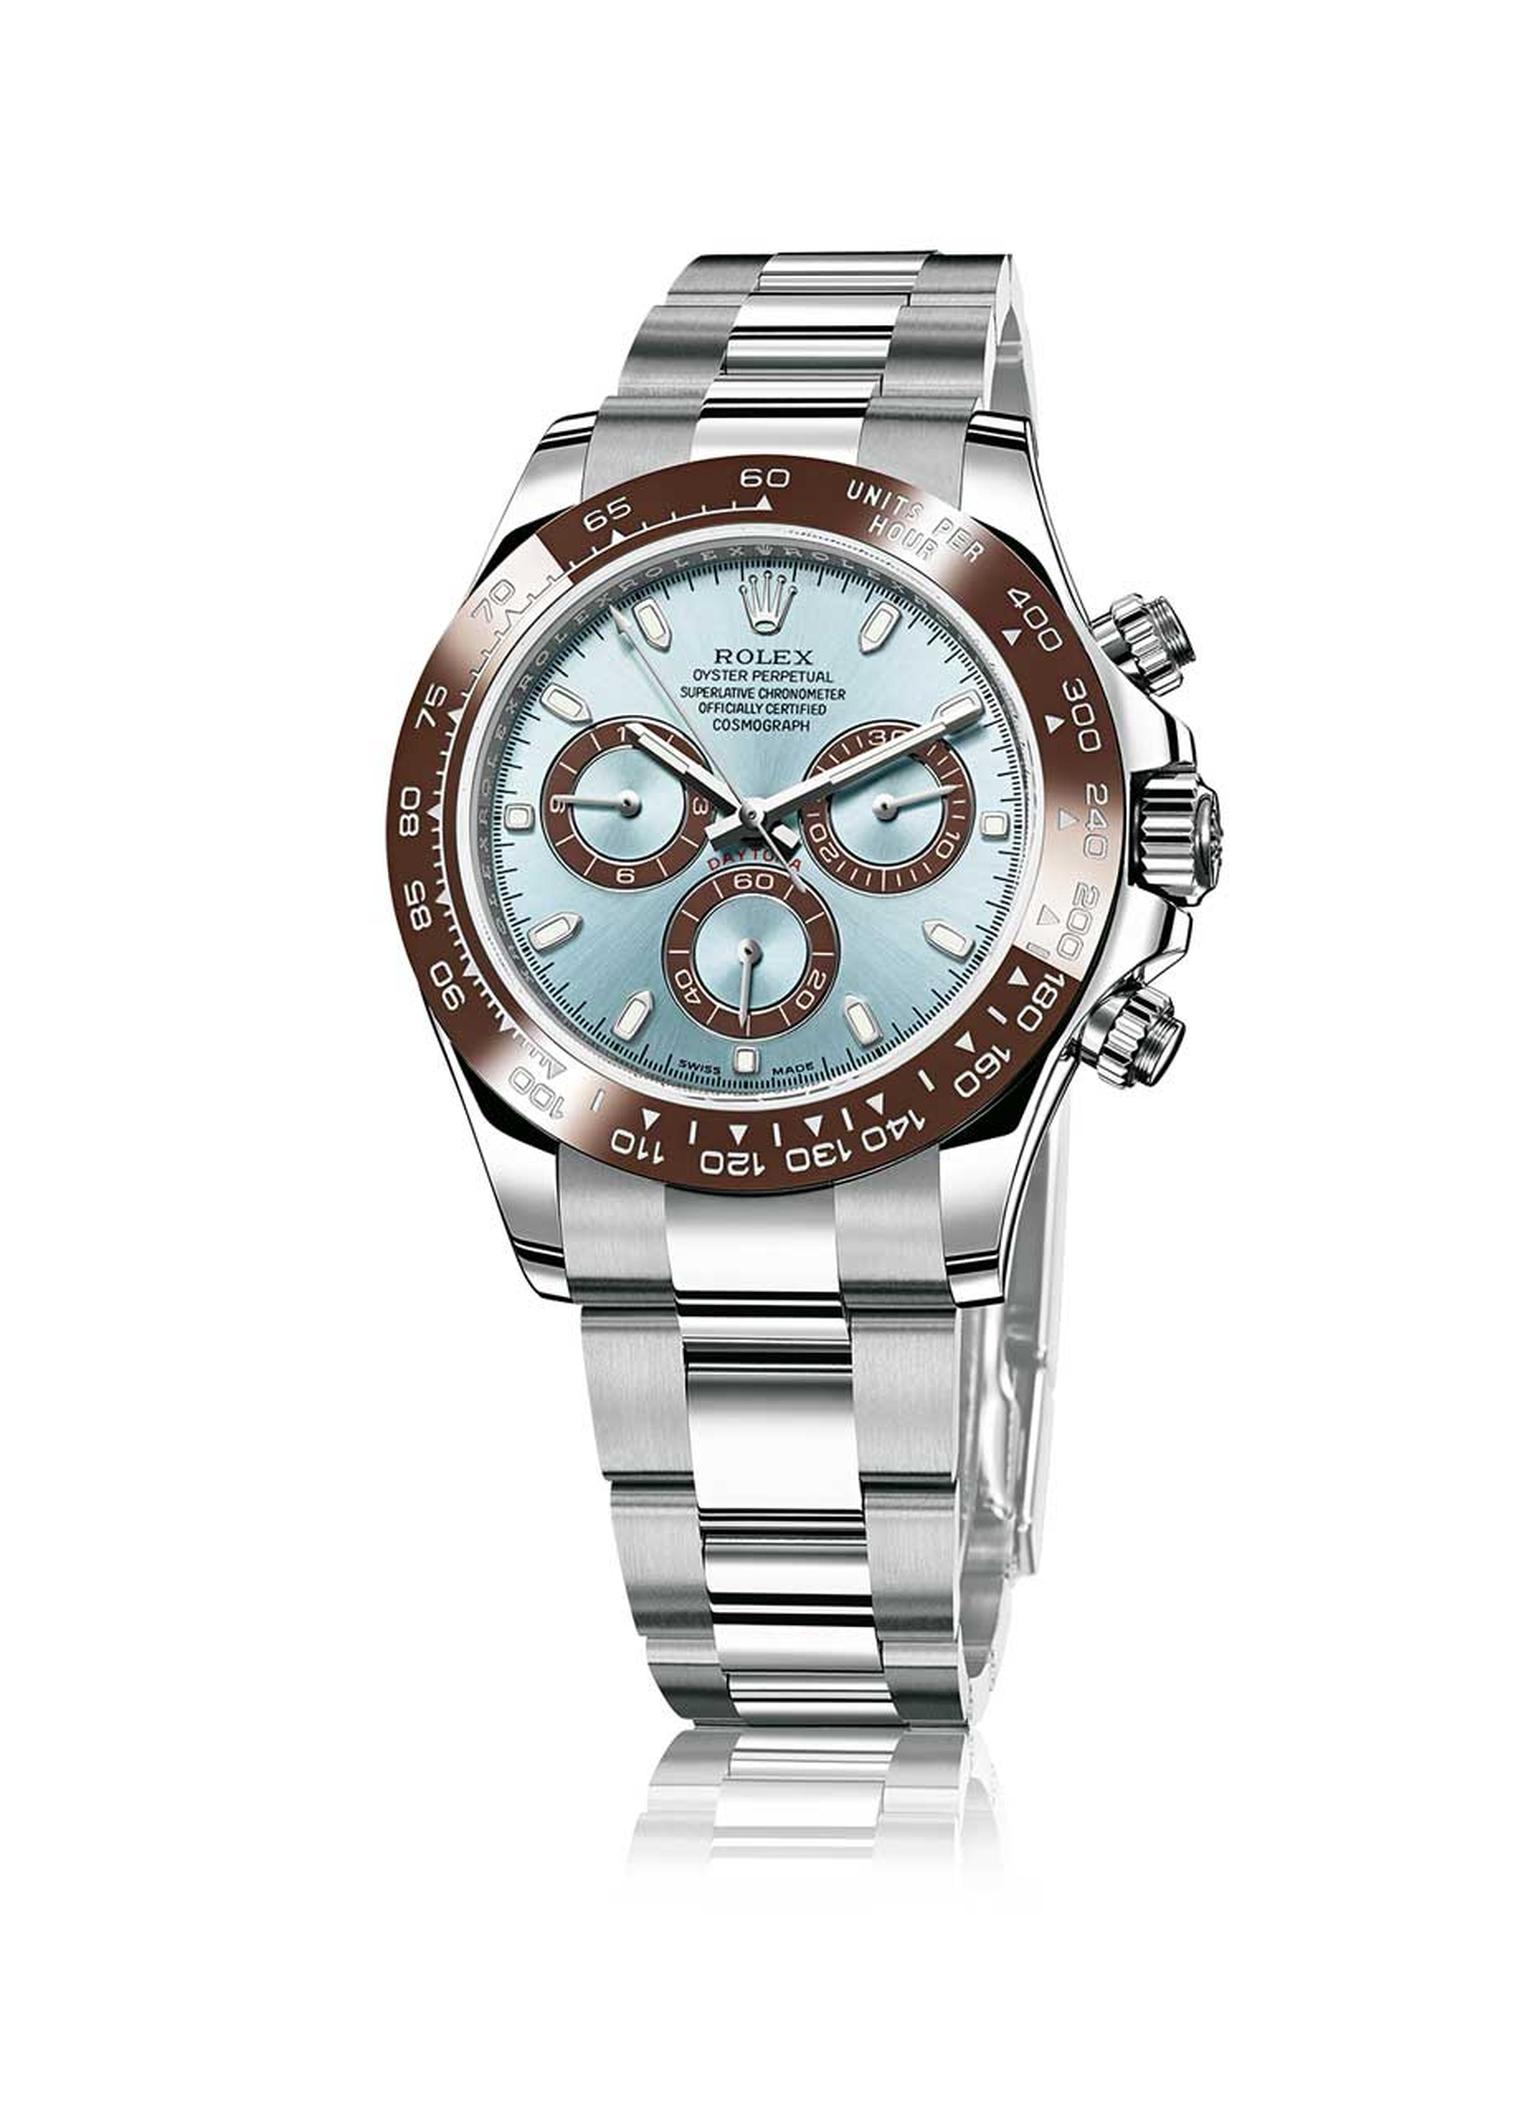 For many car-racing fans, the Rolex Daytona is the ultimate chronograph and racing watch. Launched in 1963 and named after the famous sand racetrack in Daytona, Florida, the Rolex Cosmograph Daytona watch was engineered for racing drivers.